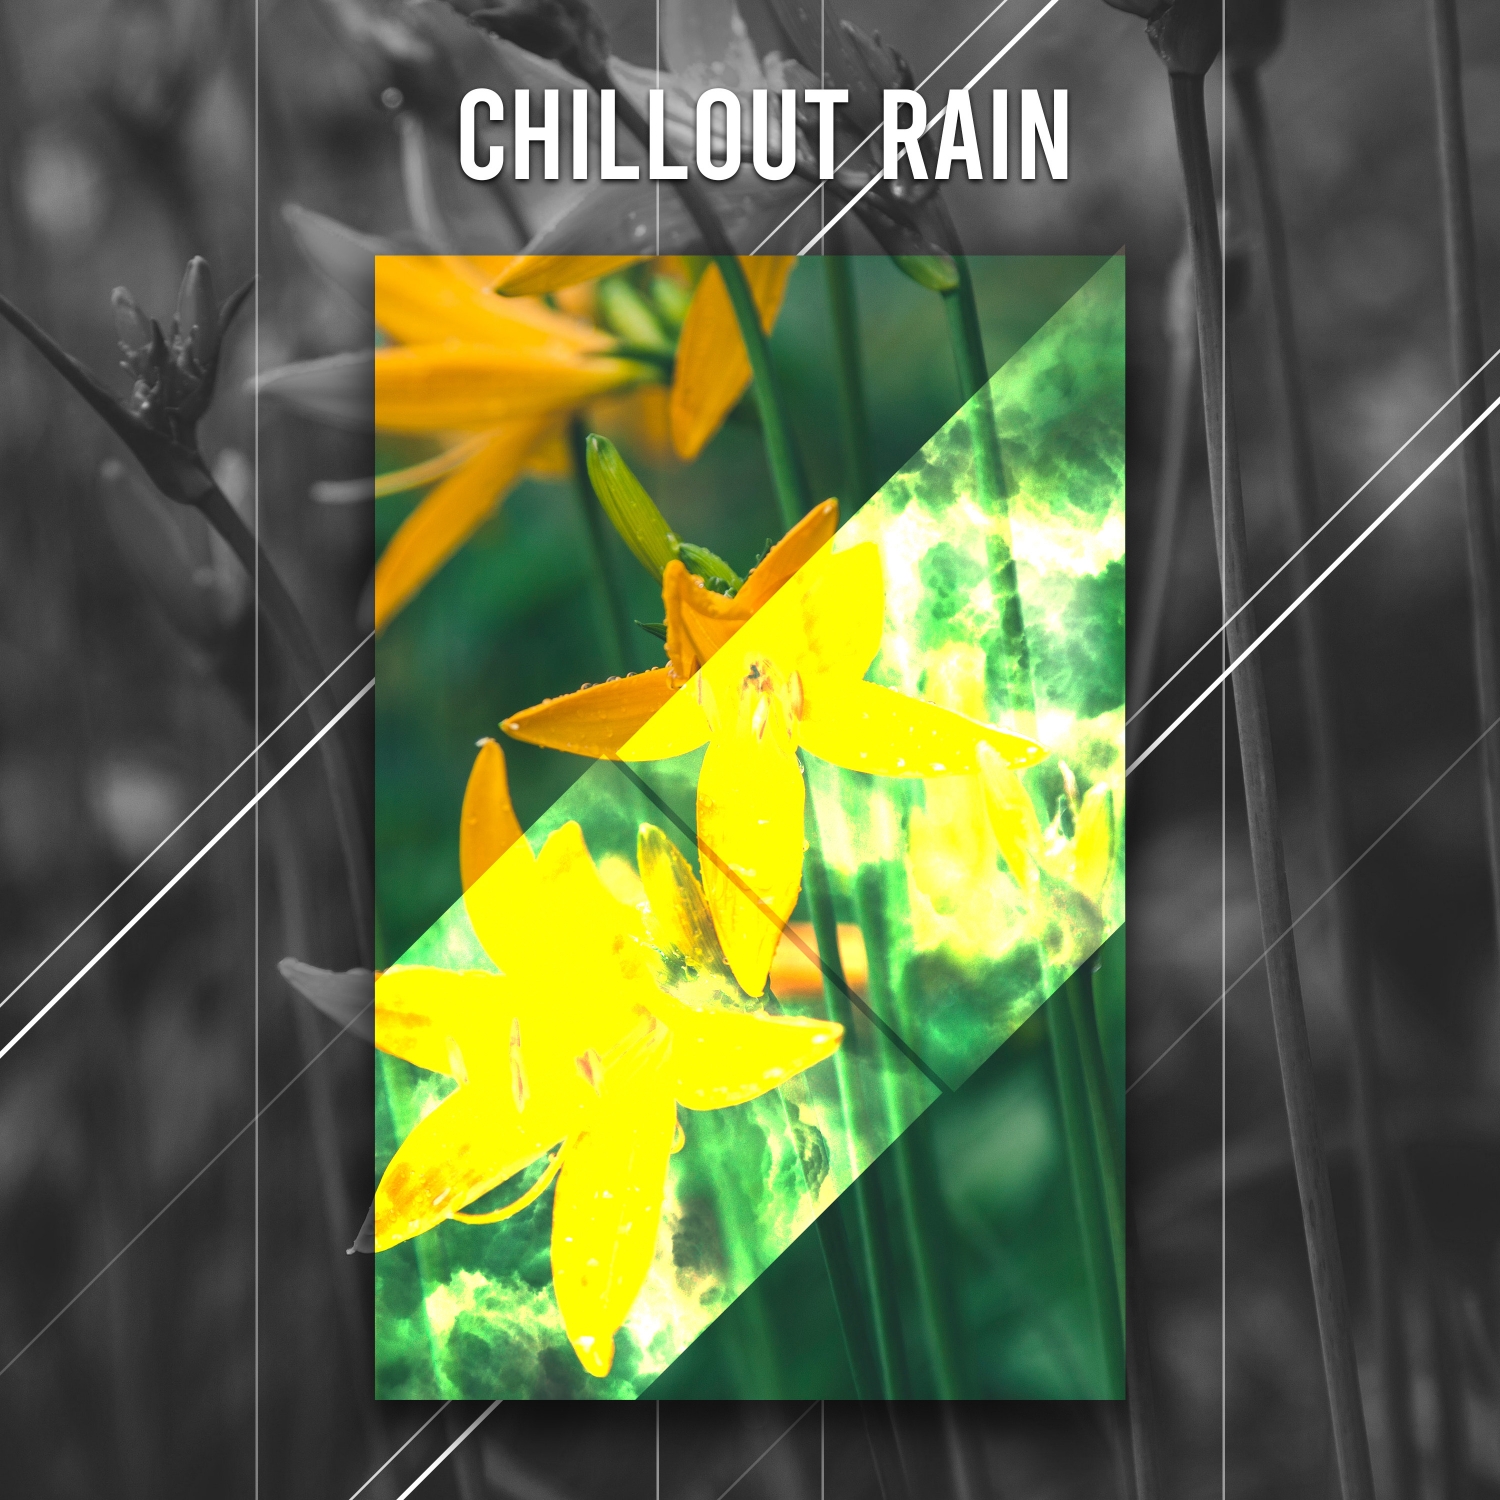 12 Relaxing Sounds, Chillout, Unwind, Relax, Meditate and Sleep with Natural Rain Sounds